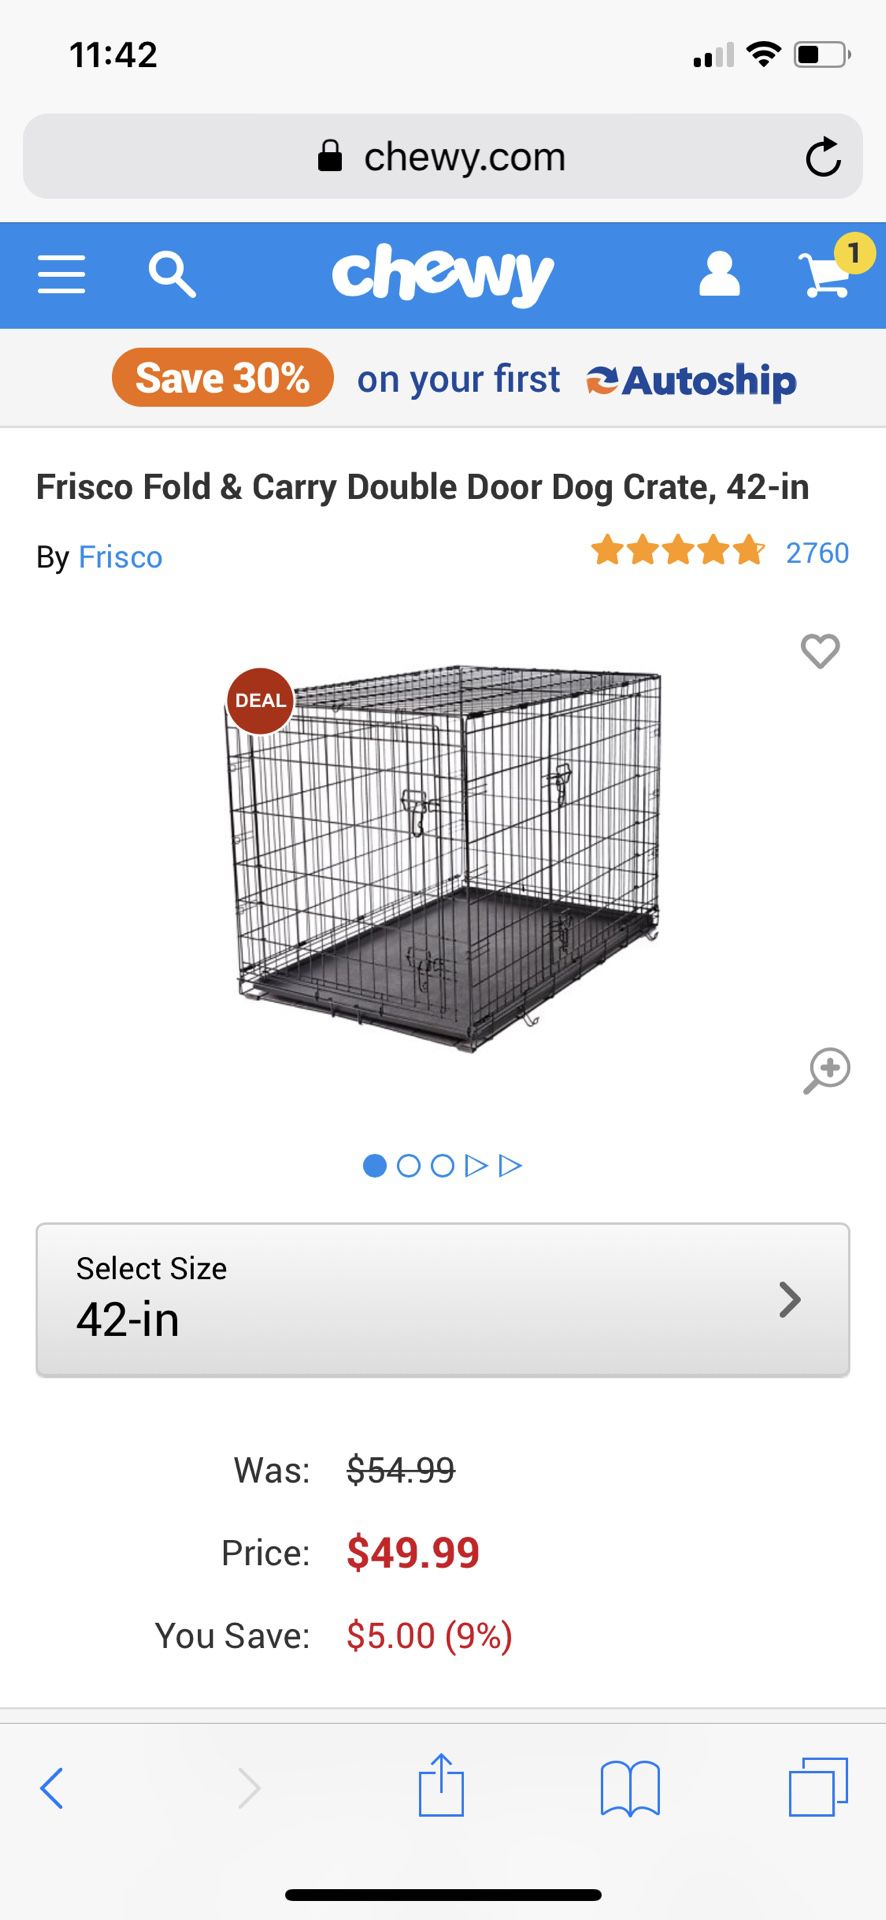 Frisco fold & carry double door dog crate, 42-in